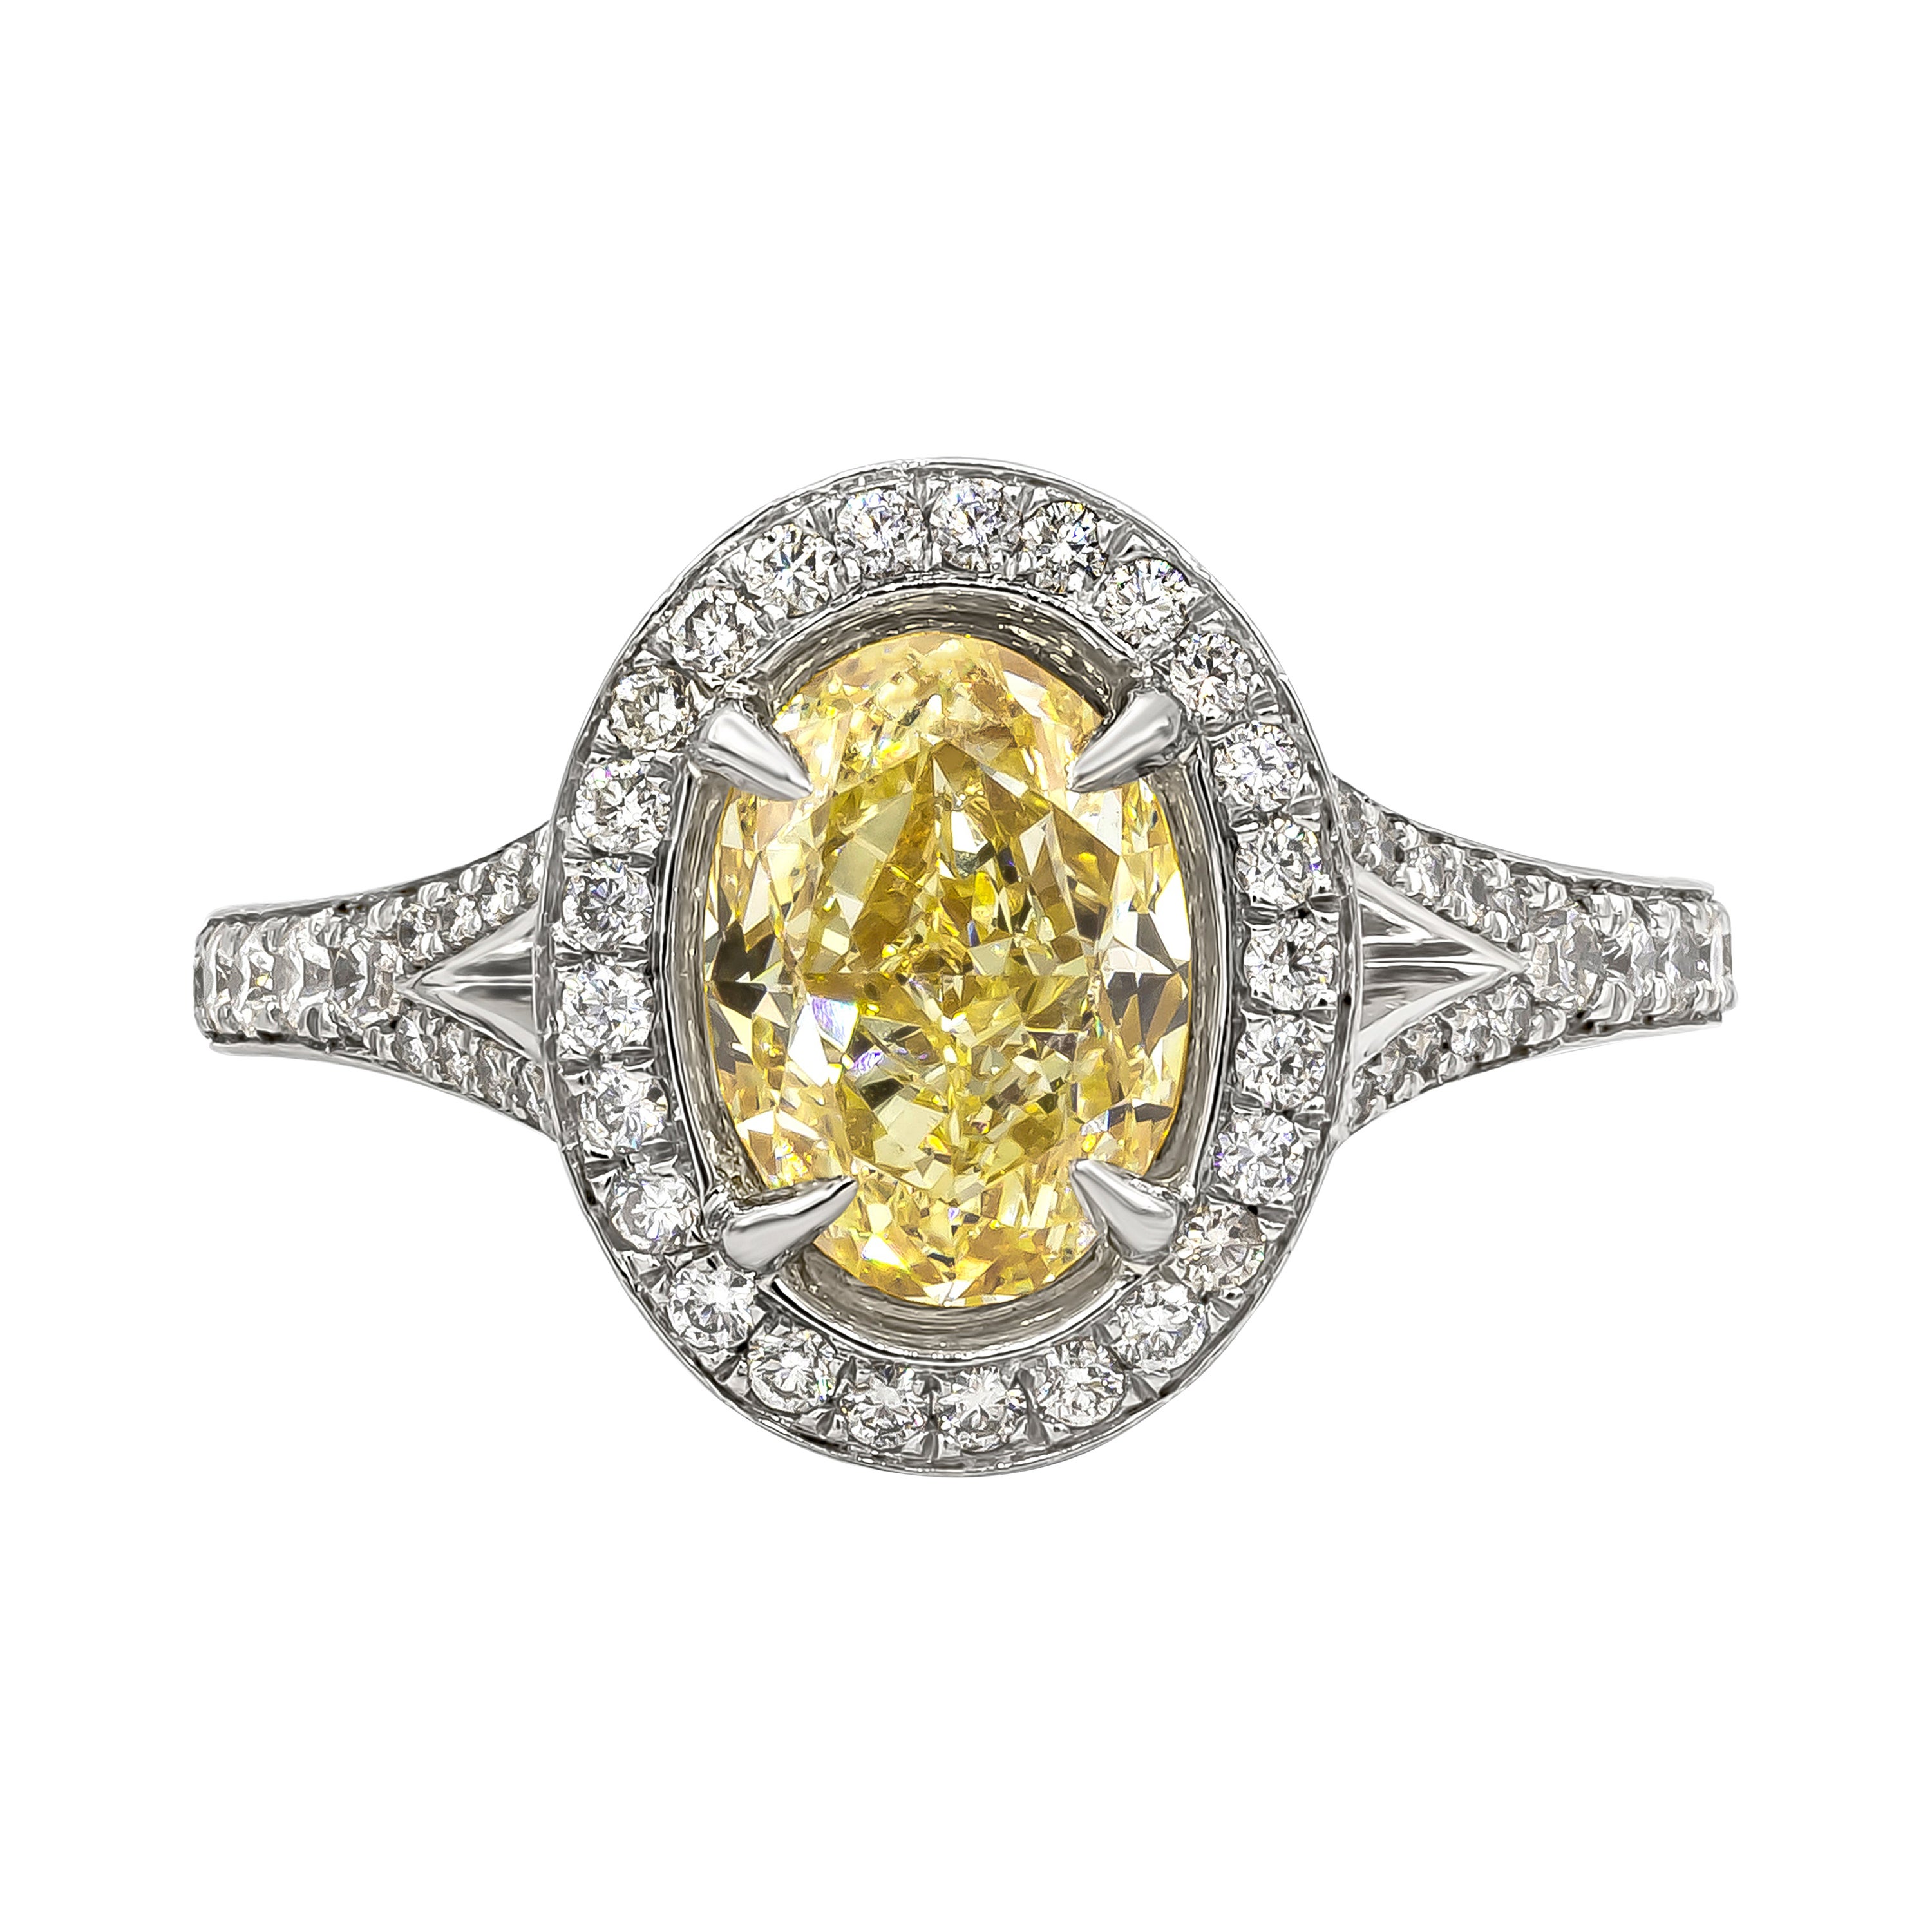 GIA Certified 1.76 Carats Oval Cut Yellow Diamond Halo Engagement Ring